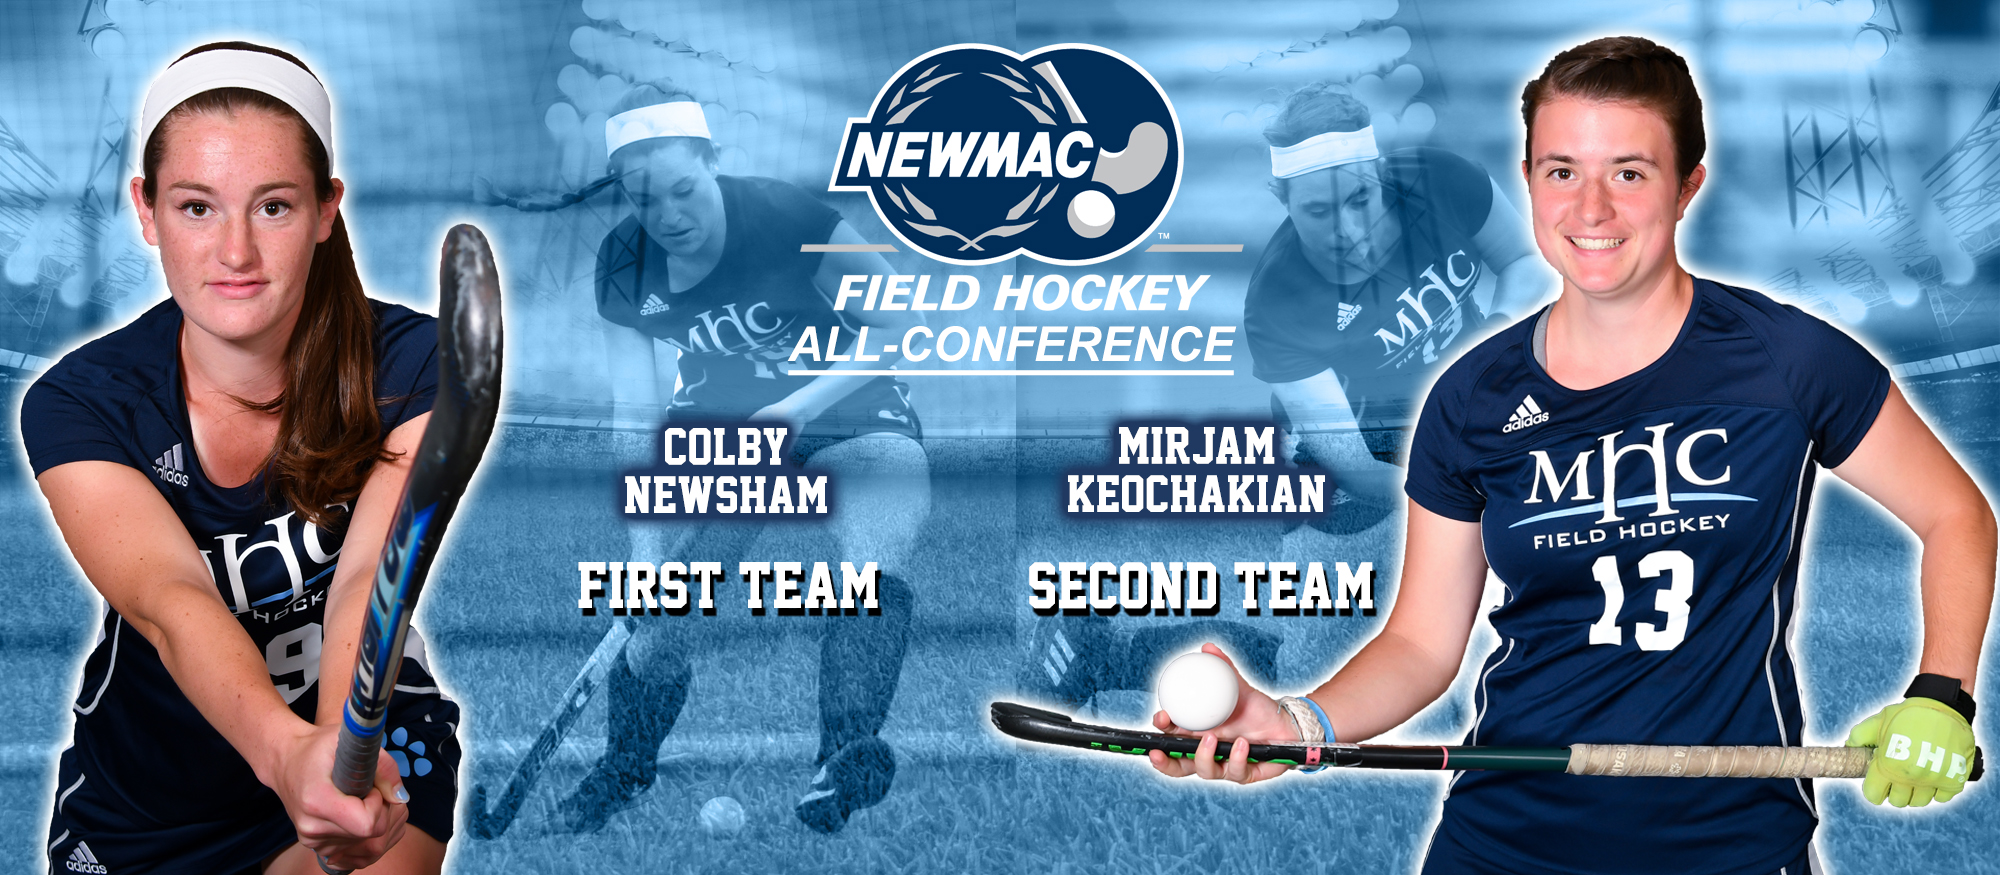 Collage photo showing Lyons field hockey seniors Colby Newsham and Mirjam Keochakian, both were named to the NEWMAC All-Conference Teams on Nov. 6, 2018. Newsham on First Team, Keochakian on Second Team.